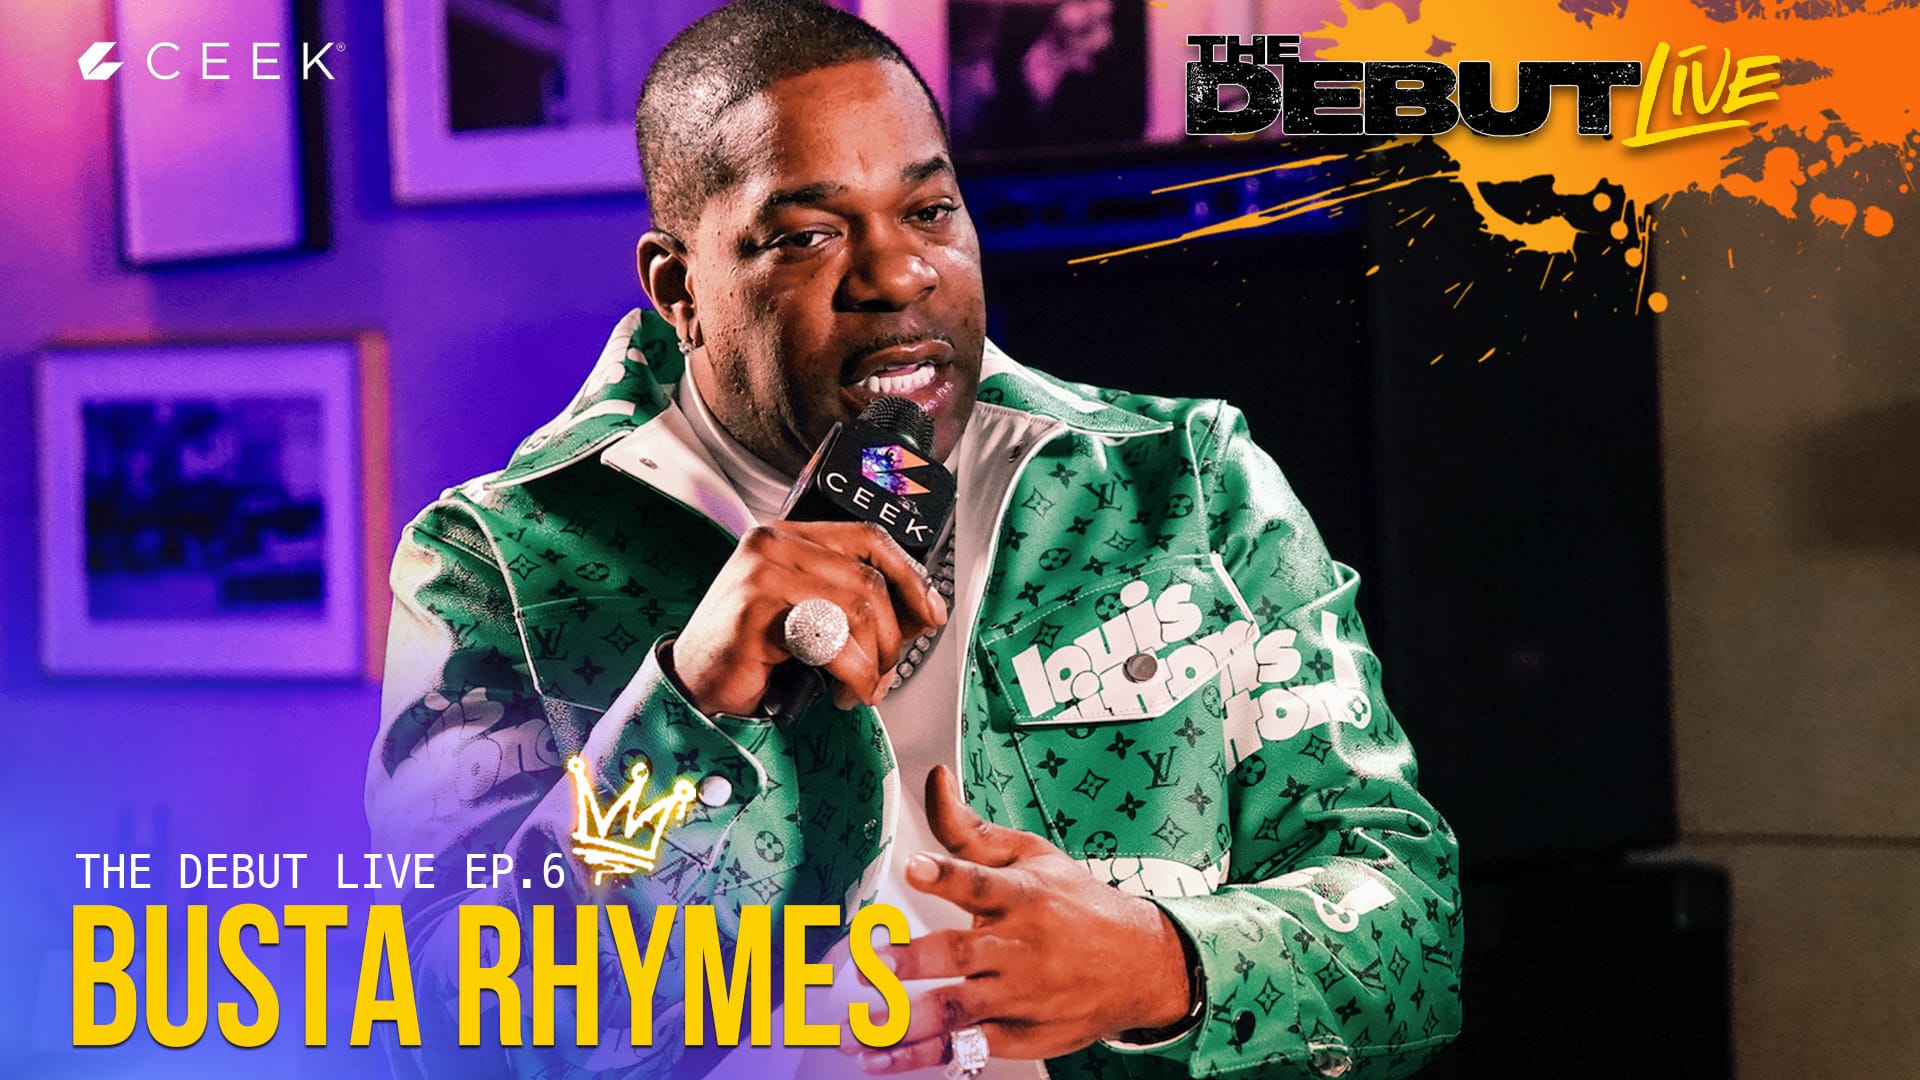 The Debut Live Ep6 ft Busta Rhymes ceek.com